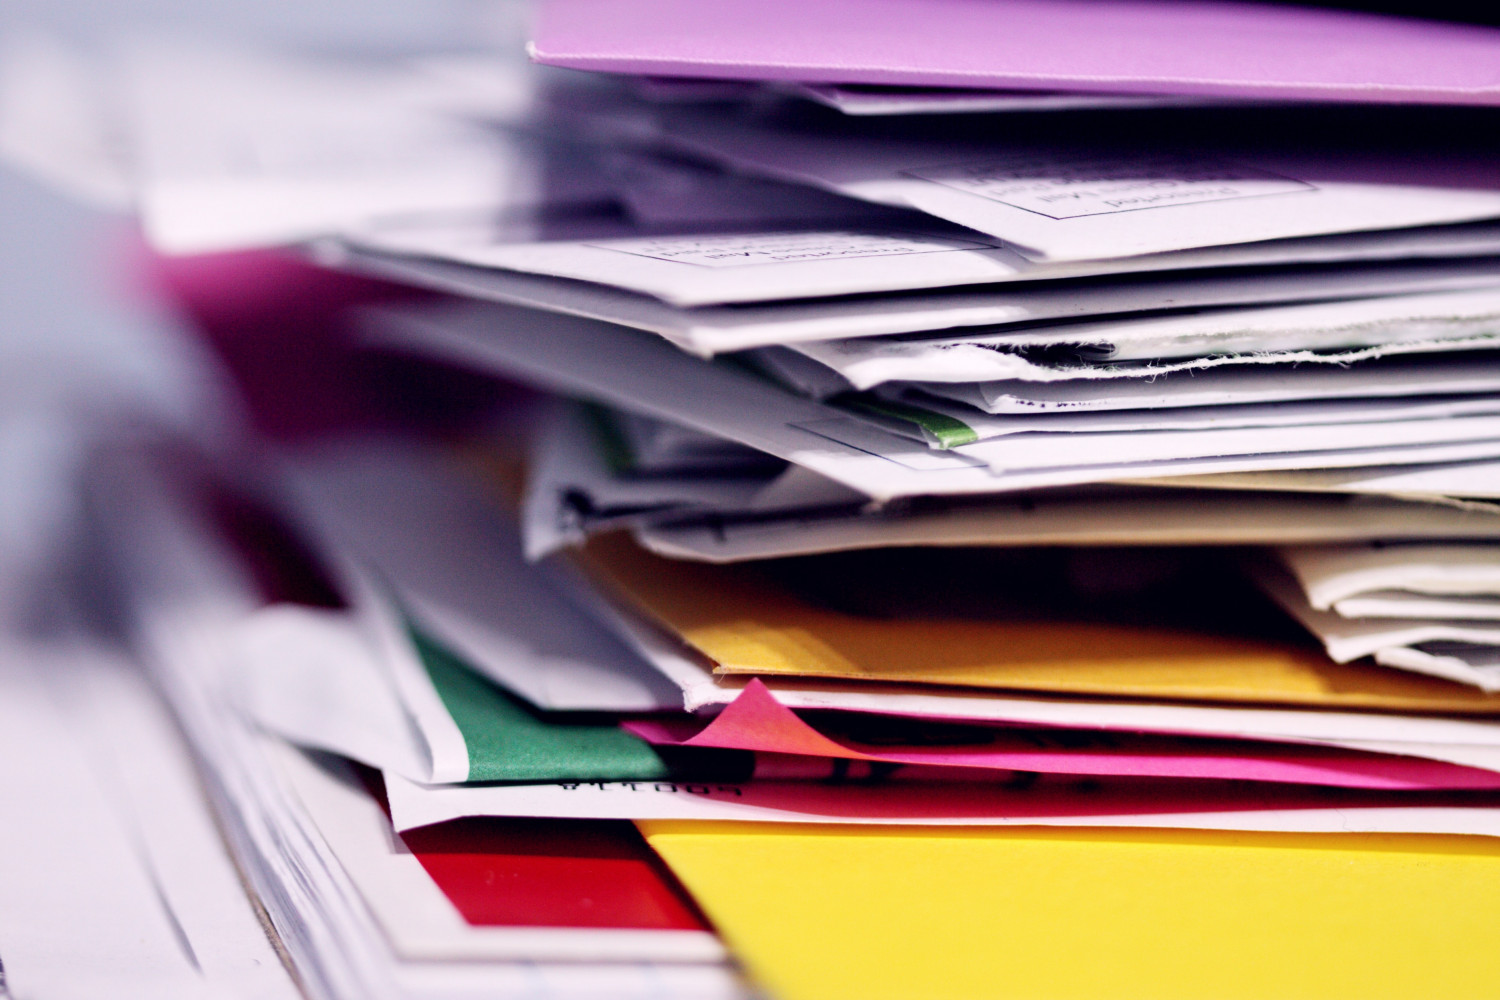 Image of a stack of papers and files